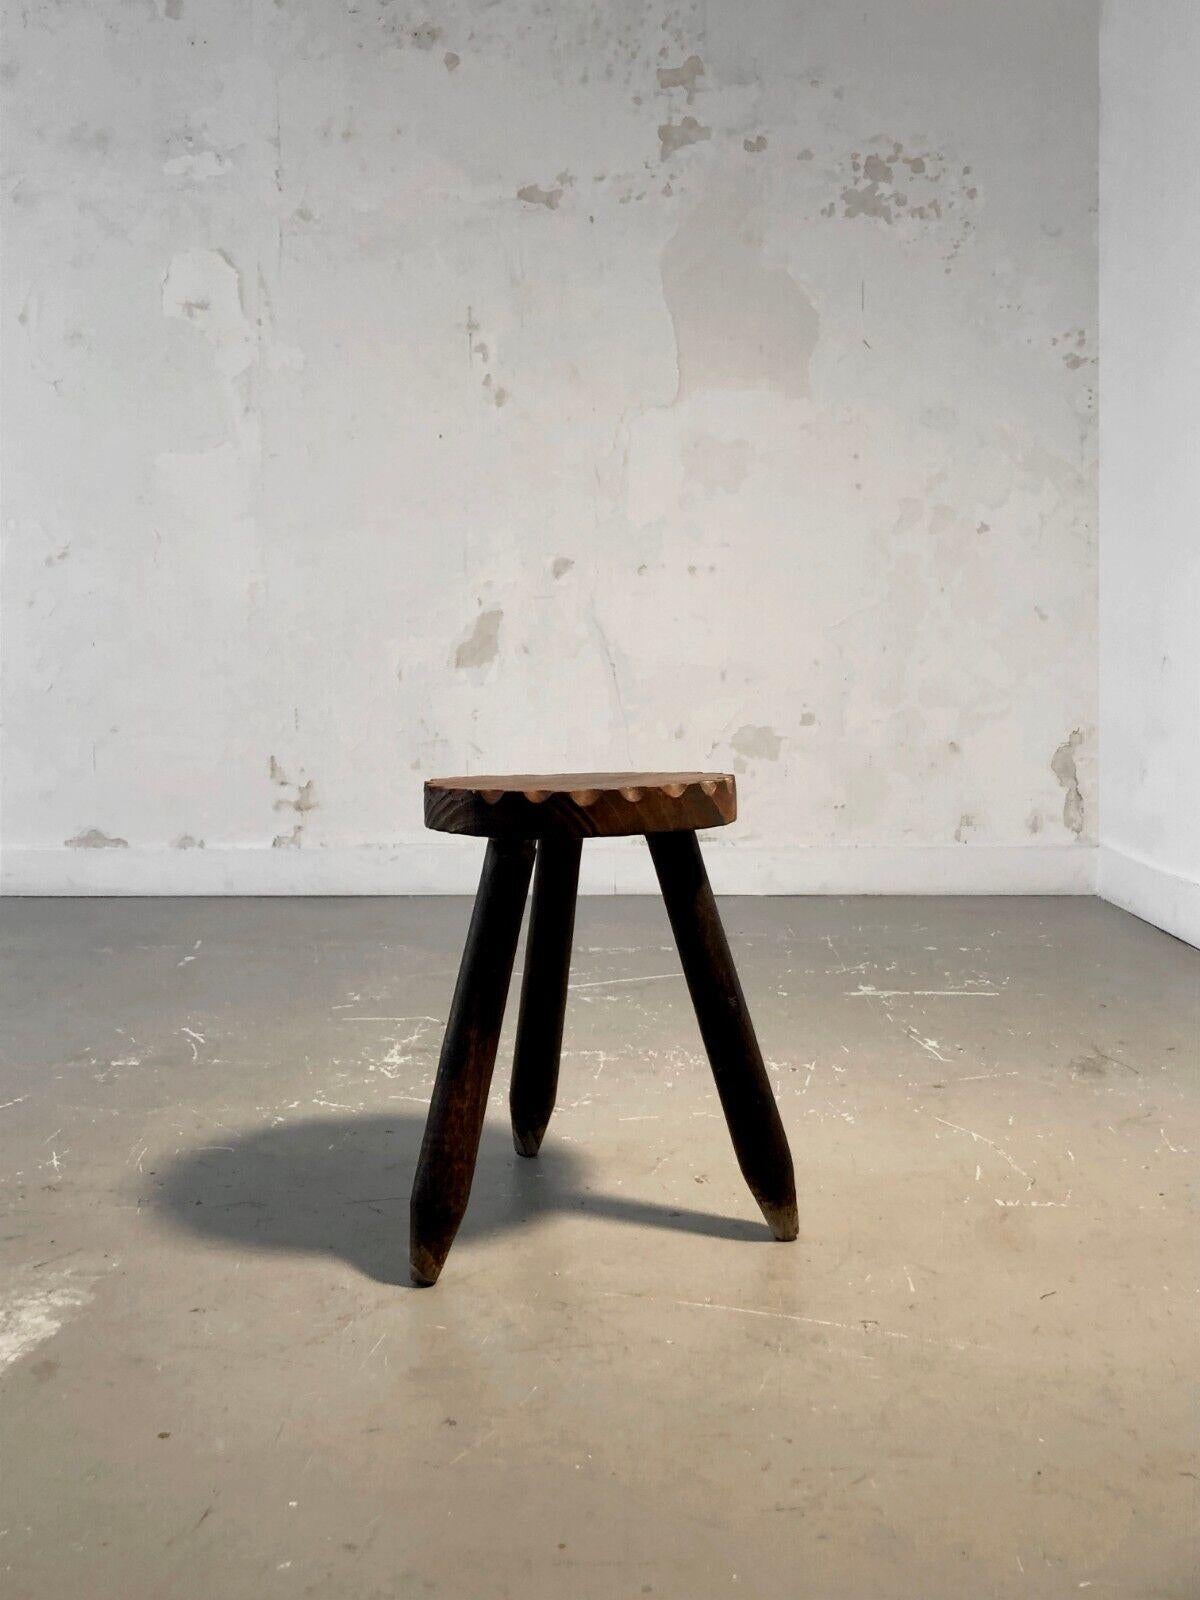 A BRUTALIST MID-CENTURY-MODERN RUSTIC STOOL, MAROLLES Style, France 1950 For Sale 5